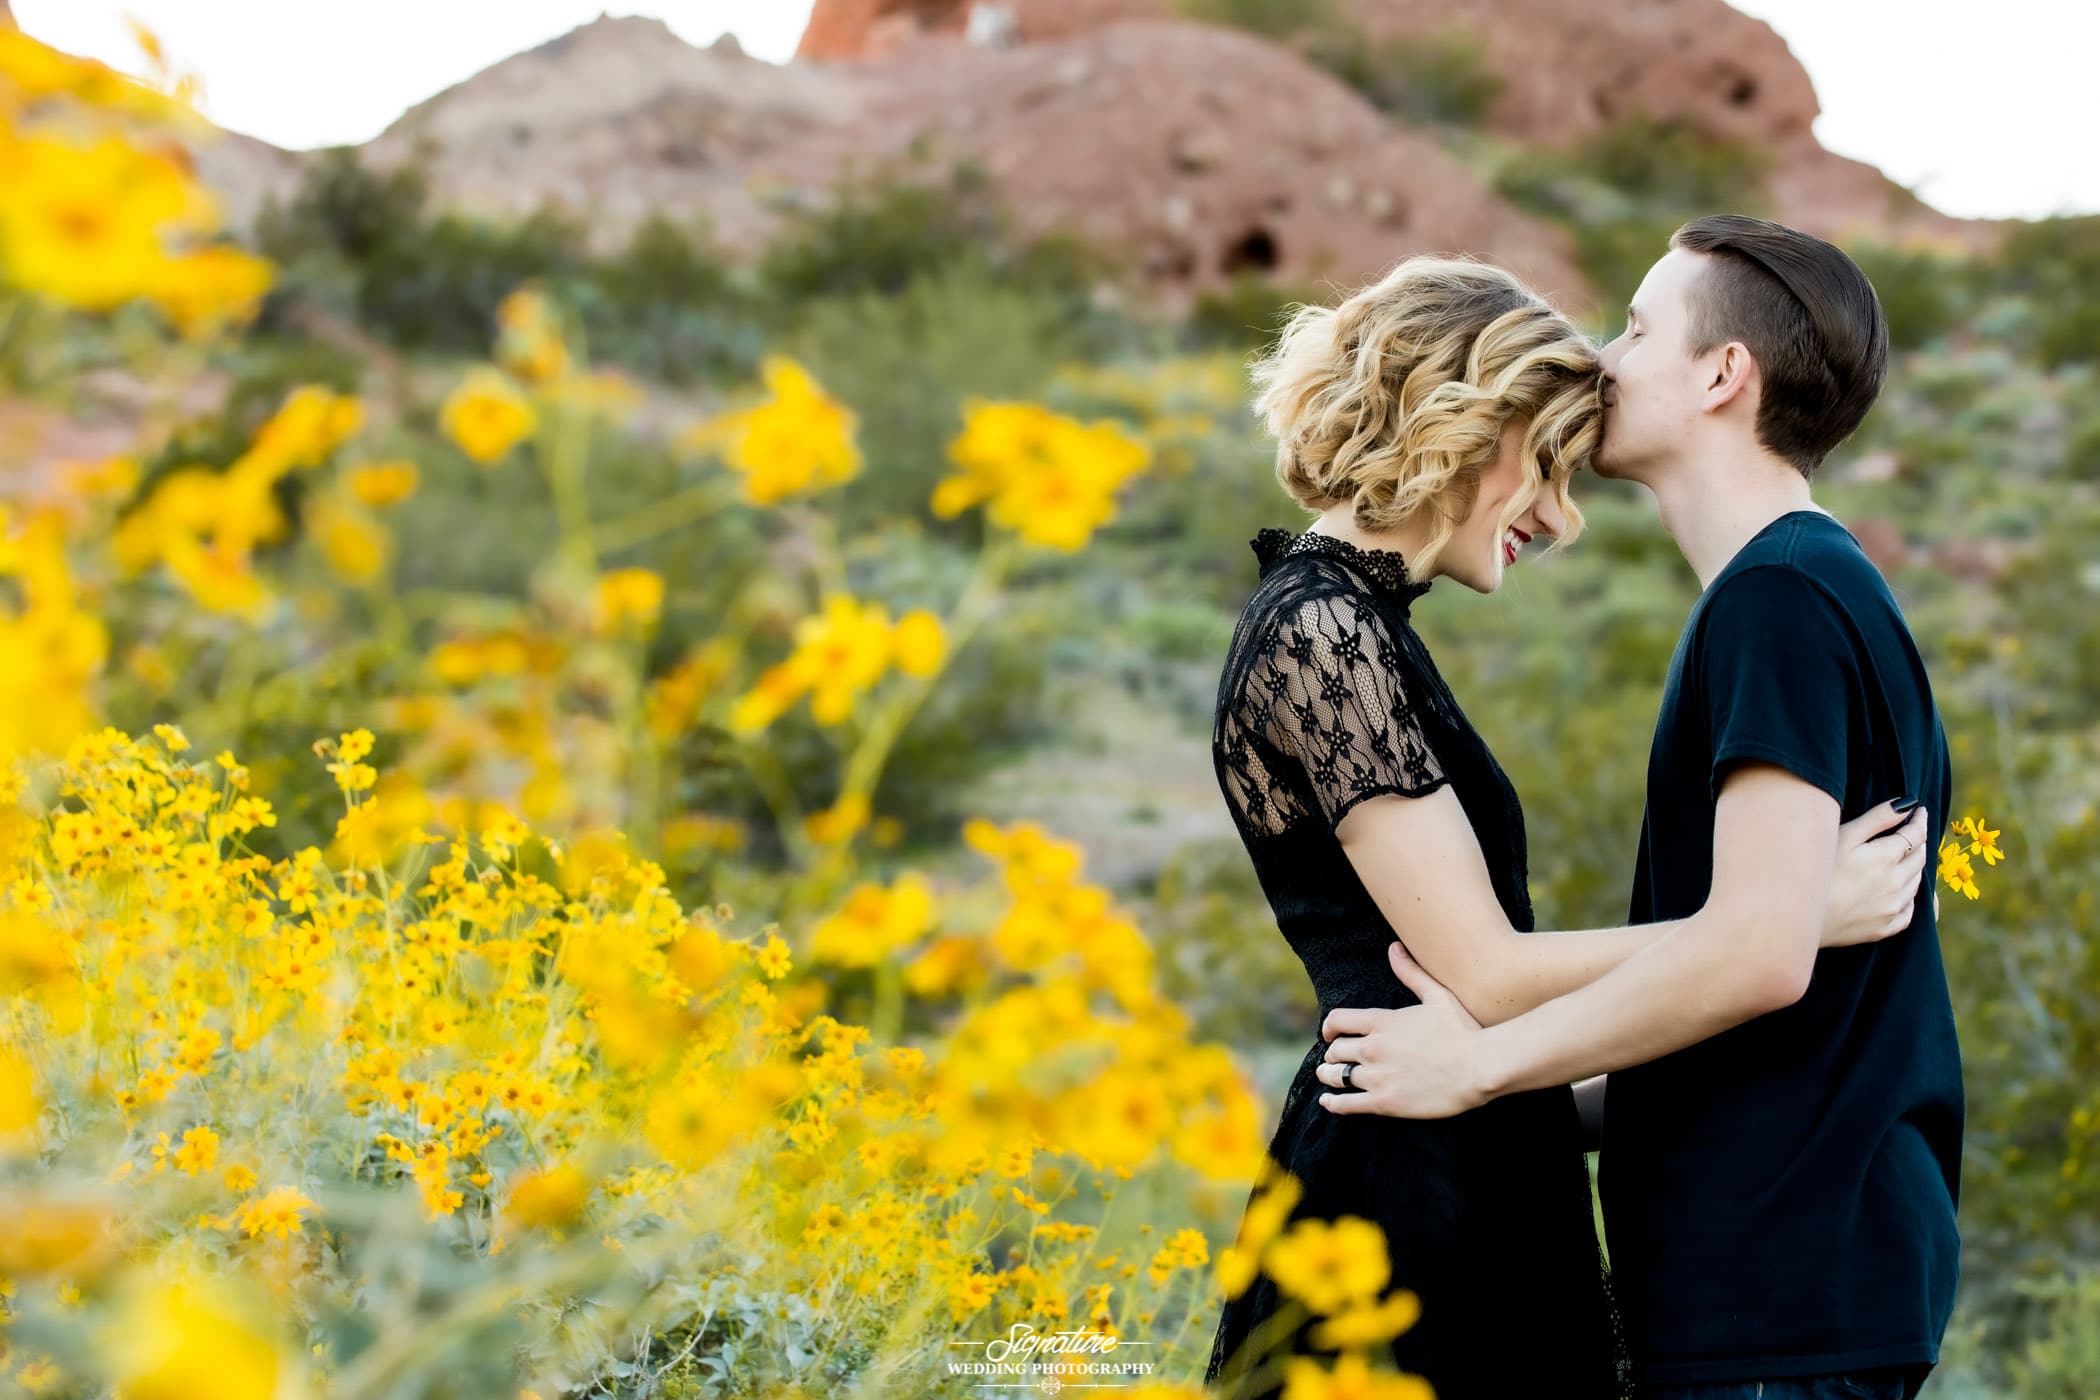 Man kissing woman on forehead with desert flowers